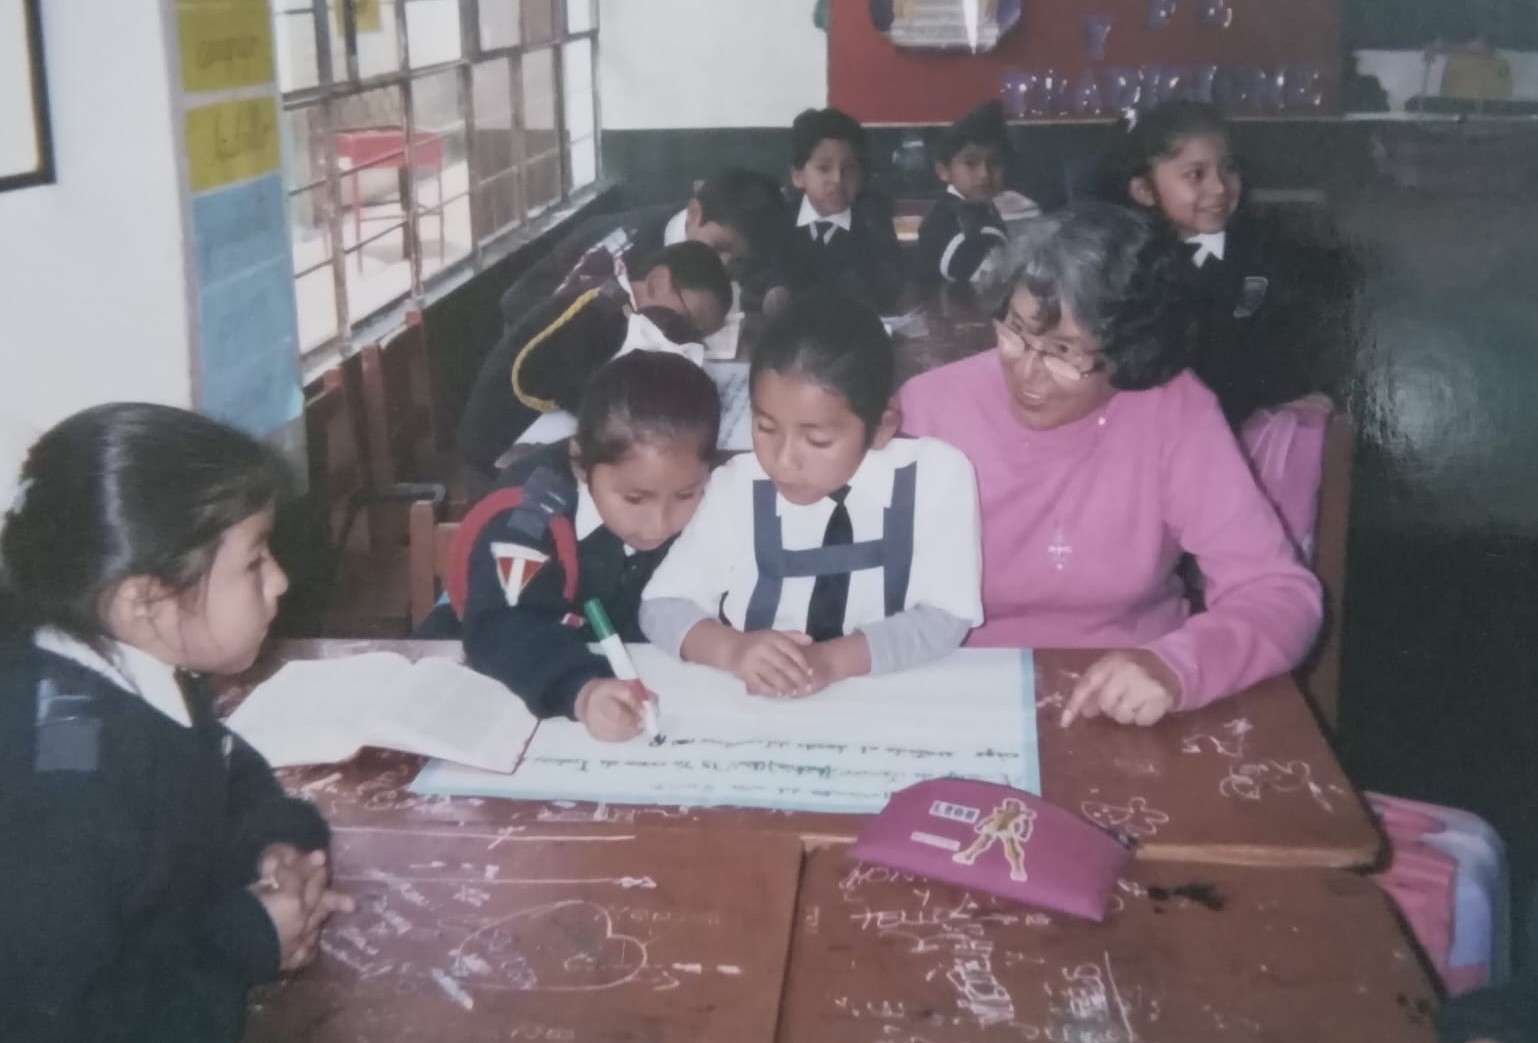 Franciscan Sr. Cristina Florez Gonzalez, right, works with children of Peruvian Air Force members in the Surco District of Lima, Peru, May 8, 2005. (Photo courtesy of Cristina Florez Gonzalez)